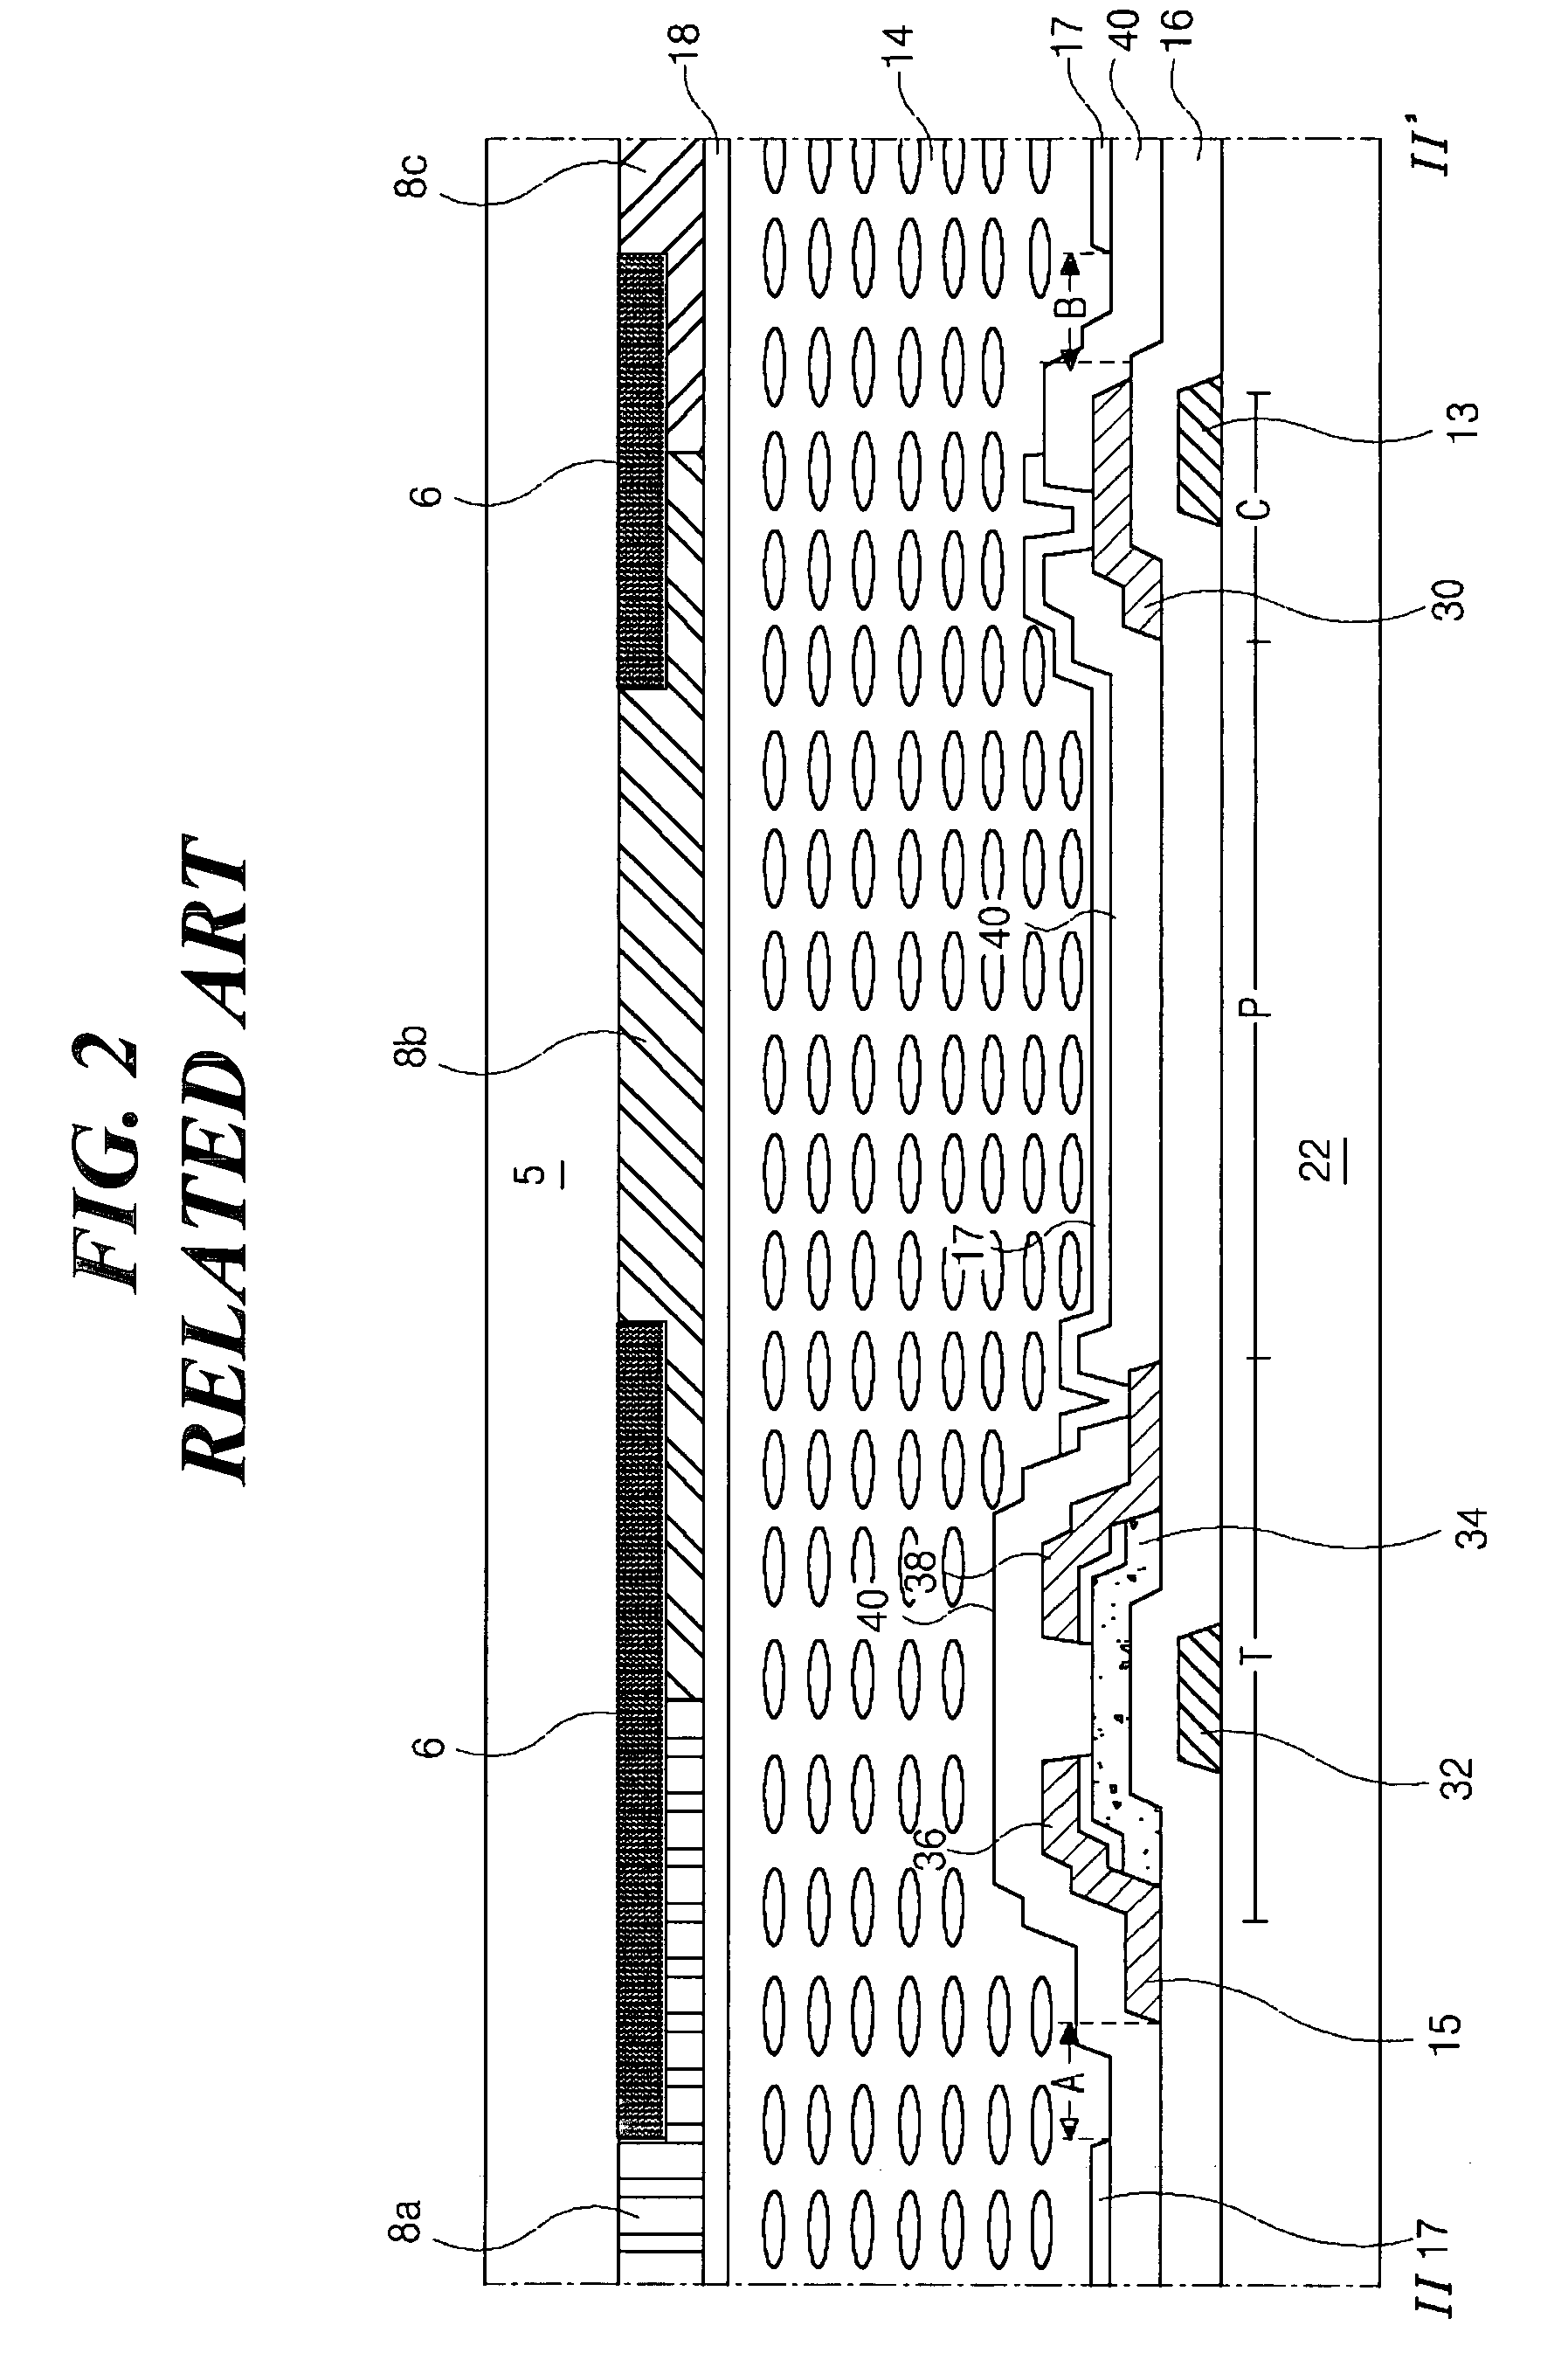 Array substrate having color filter on thin film transistor structure for LCD device and method of fabricating the same